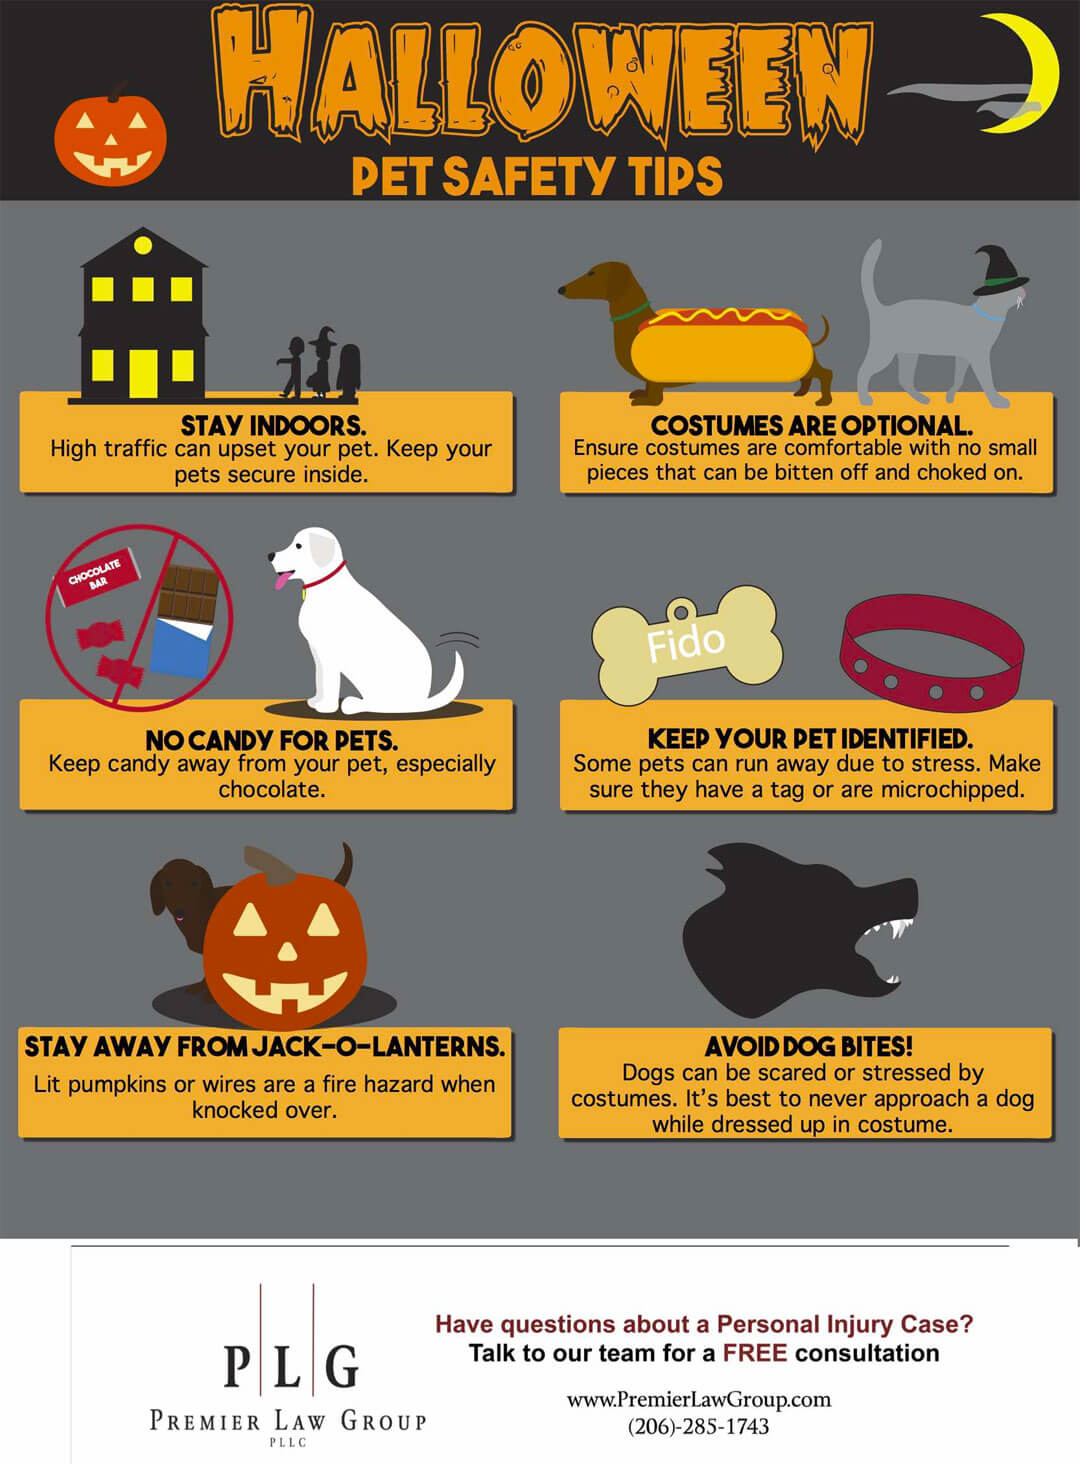 Personal injury dog safety tips